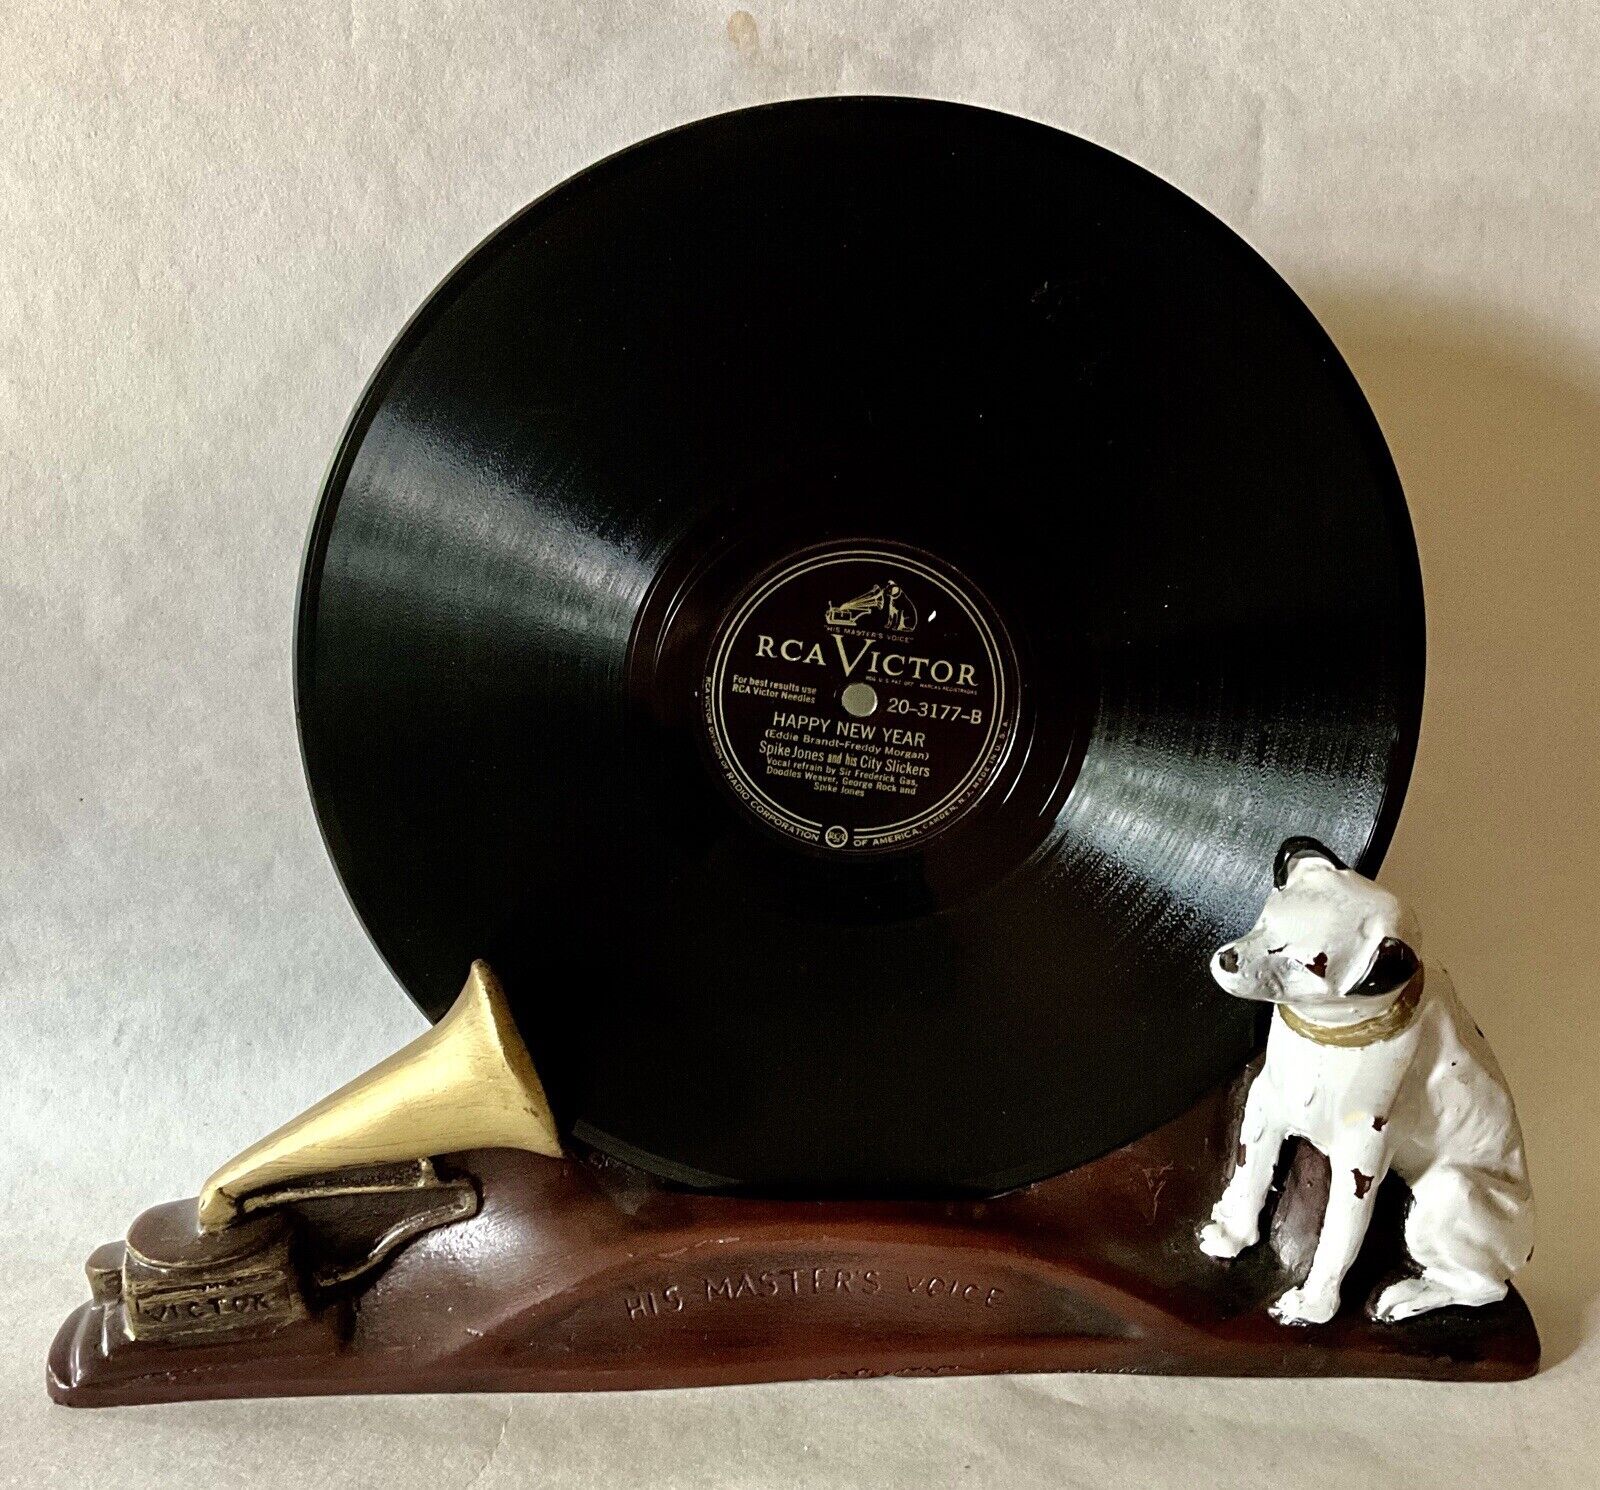 Antique RCA VICTOR CAST IRON RECORD HOLDER - STORE DISPLAY “His Masters Voice”